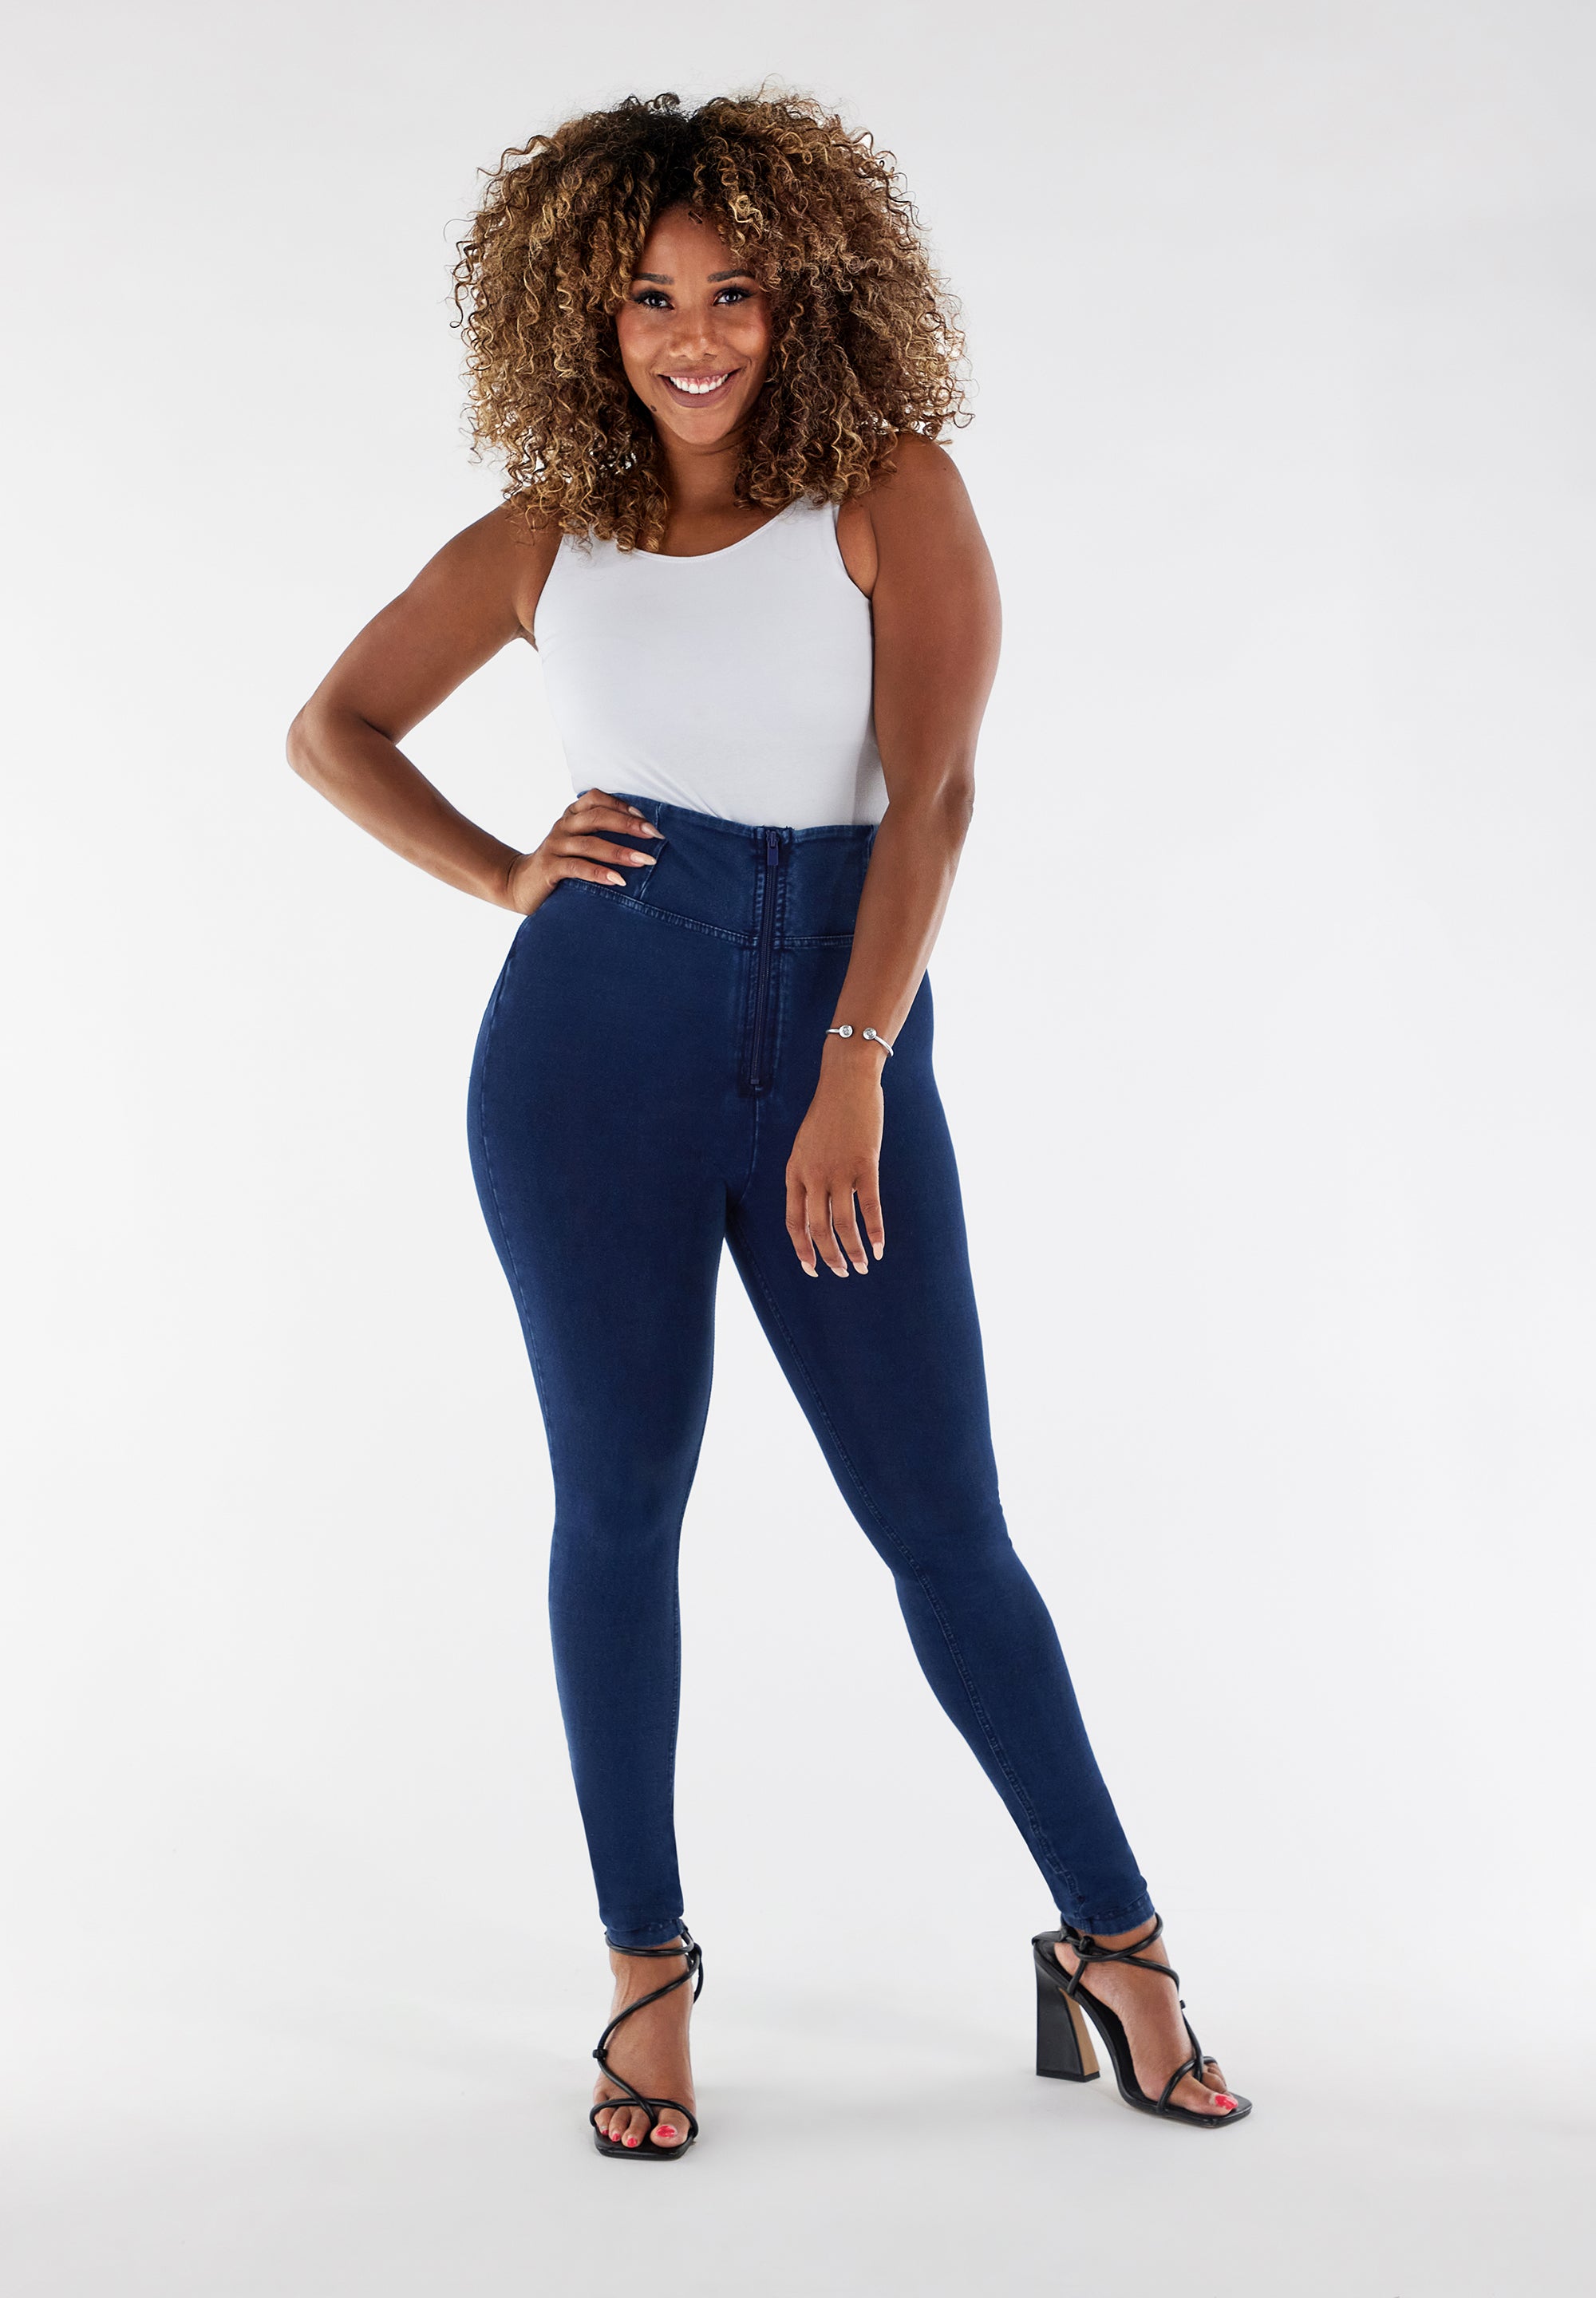 Wholesale Plus Size Shapewear To Create Slim And Fit Looking Silhouettes 